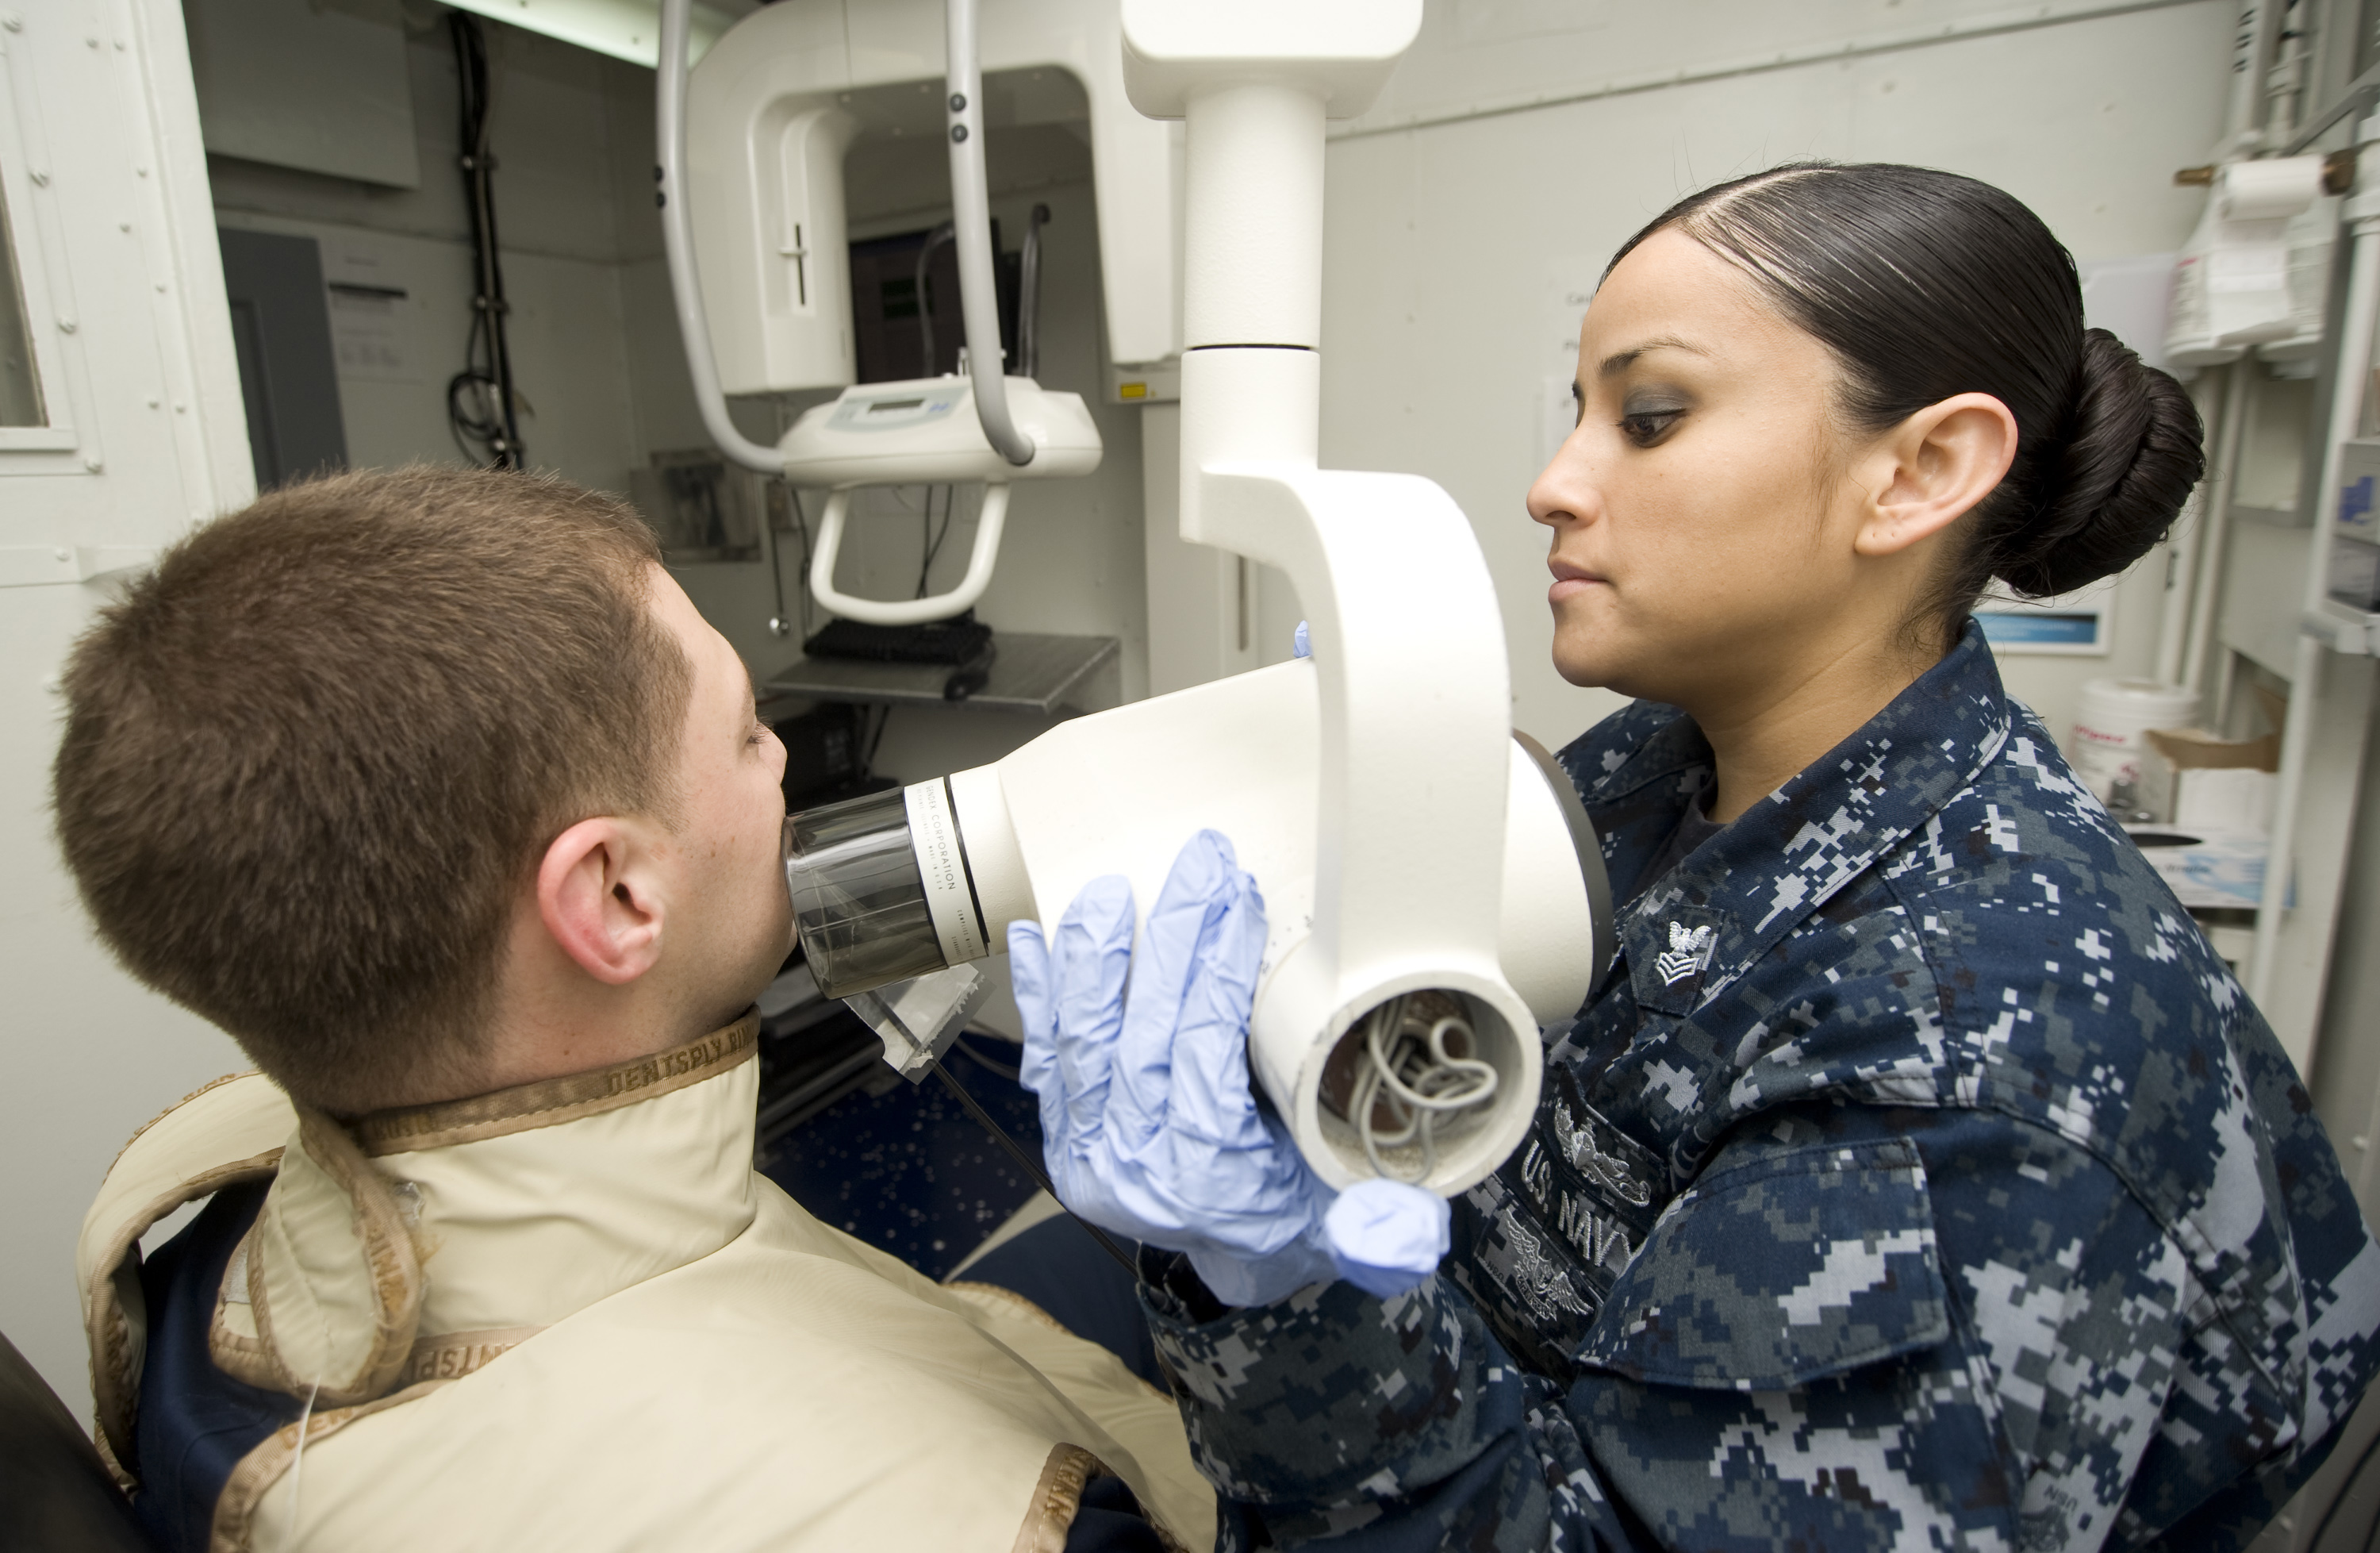 US Navy 120131-N-JN664-014 Hospital Corpsman 1st Class Laura Blanco takes X-rays of Electrician's Mate 1st Class Cory Hartley aboard the Nimitz-cla